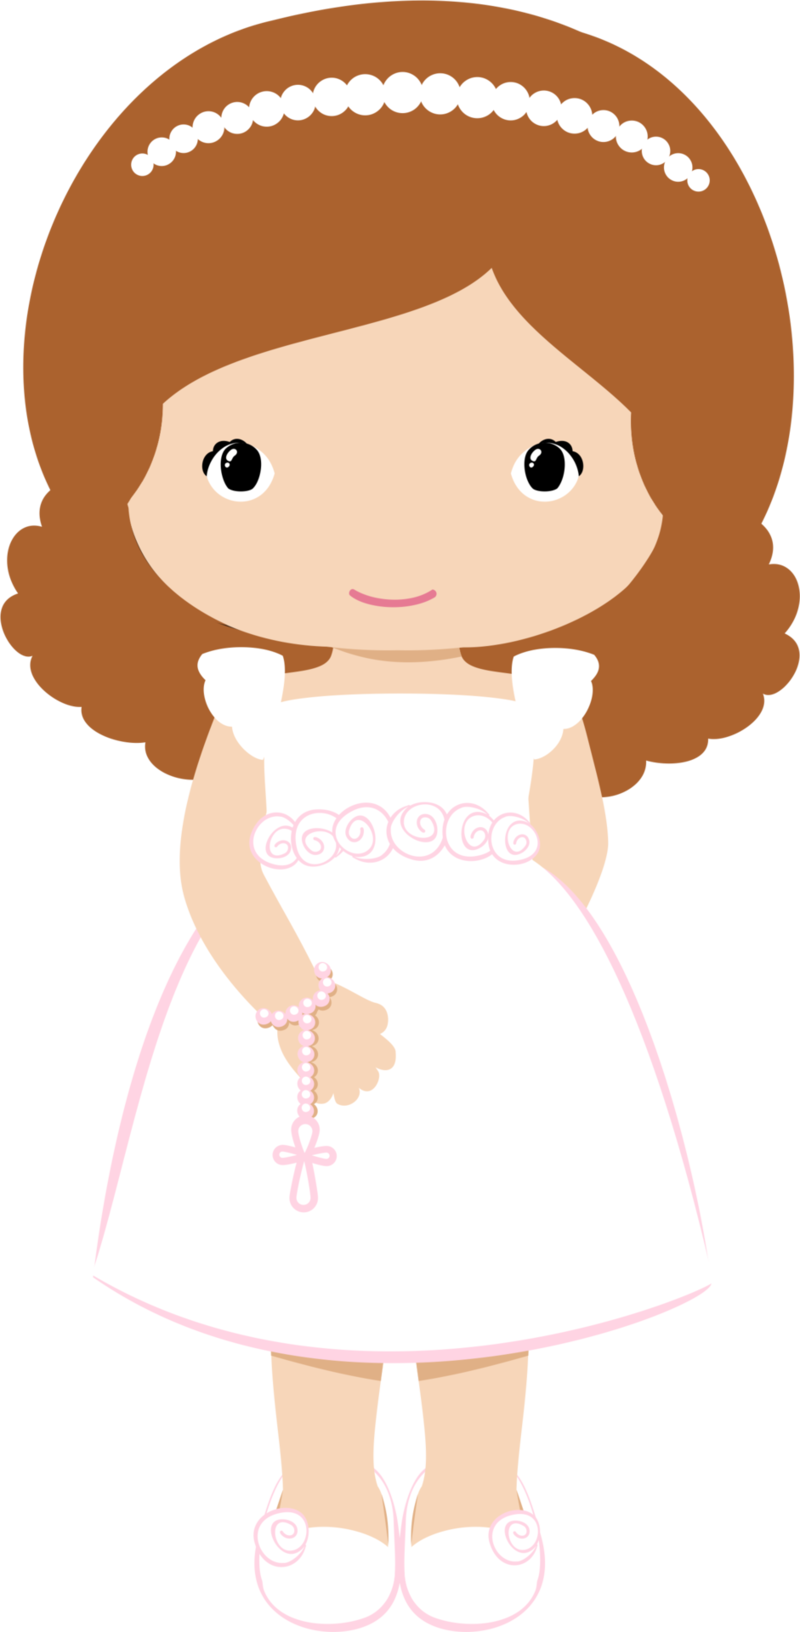 165-1653052_banner-download-girls-in-their-first-communion-clip.png